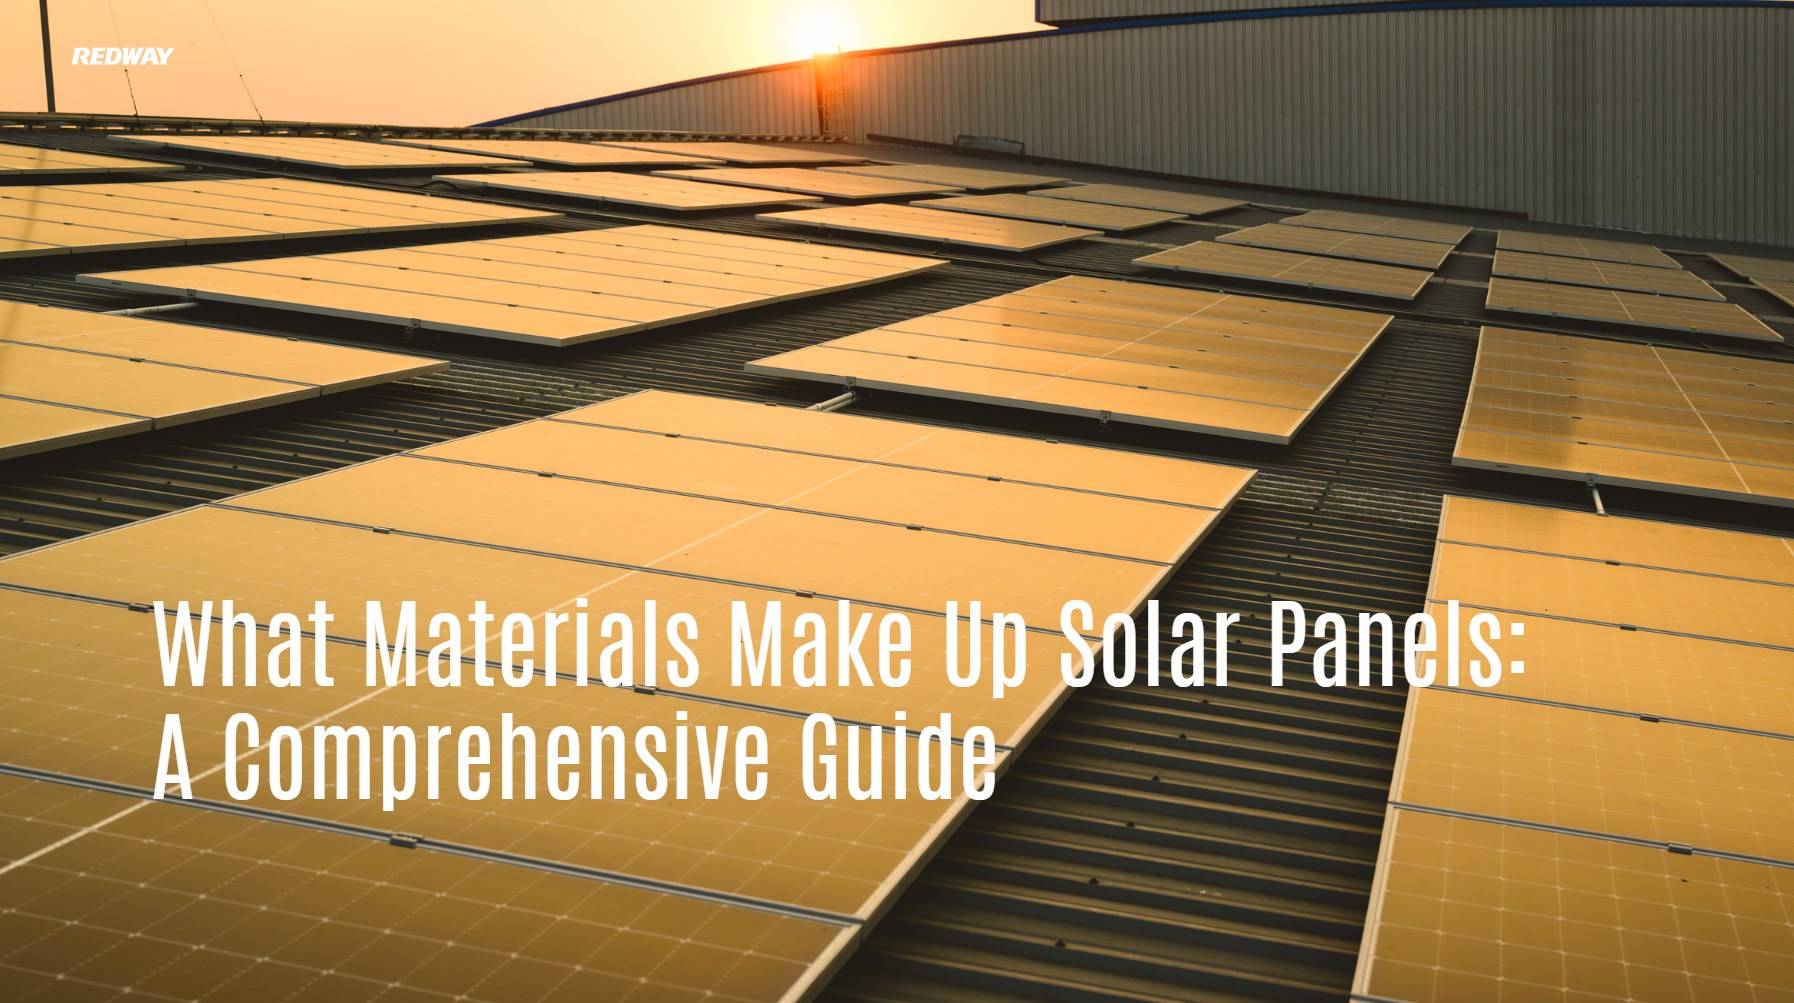 What Materials Make Up Solar Panels: A Comprehensive Guide. redway